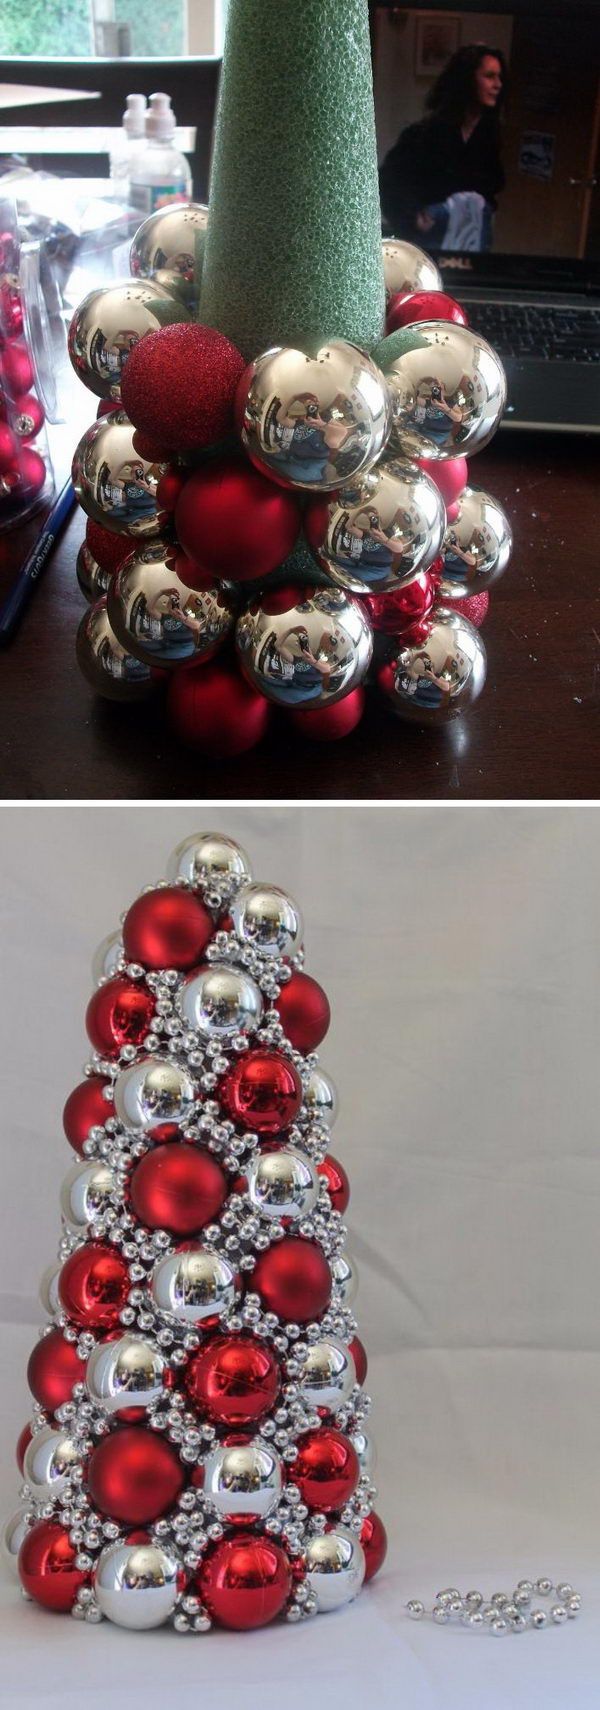 Pinterest Christmas Decorations DIY
 20 Great Ways To Decorate Your Home With Christmas Ornaments